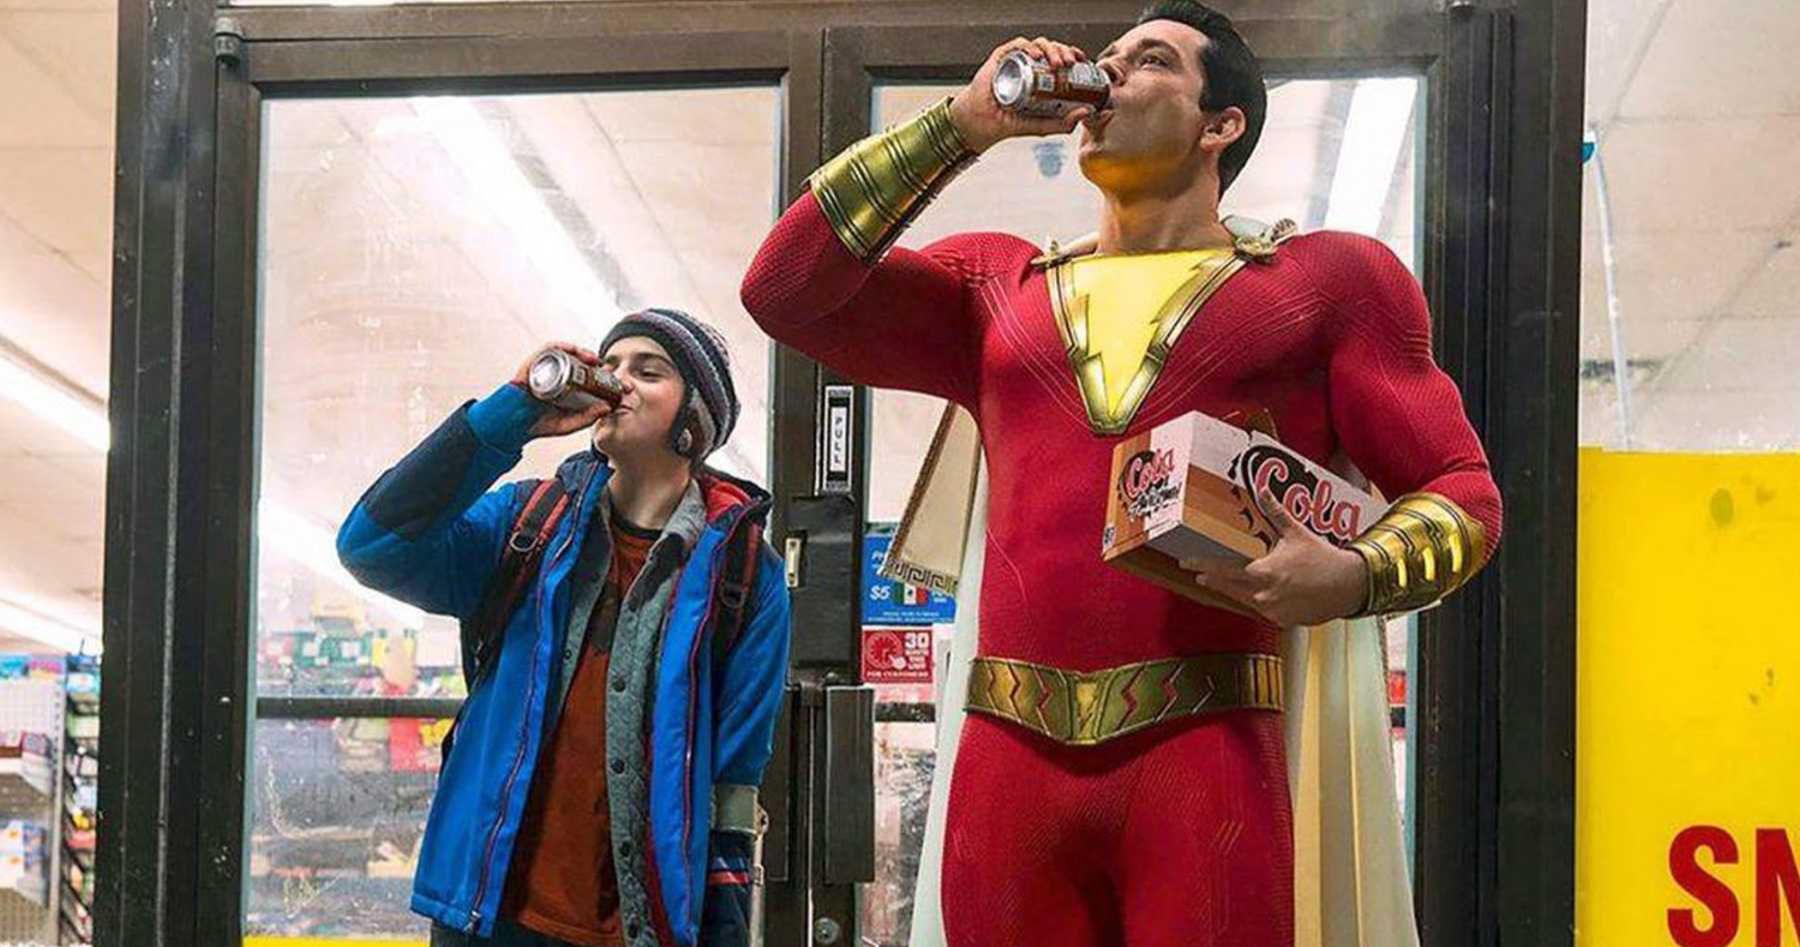 Shazam 2: Fury of the Gods Director Shares Inspiring Words for Other Introverted Filmmakers